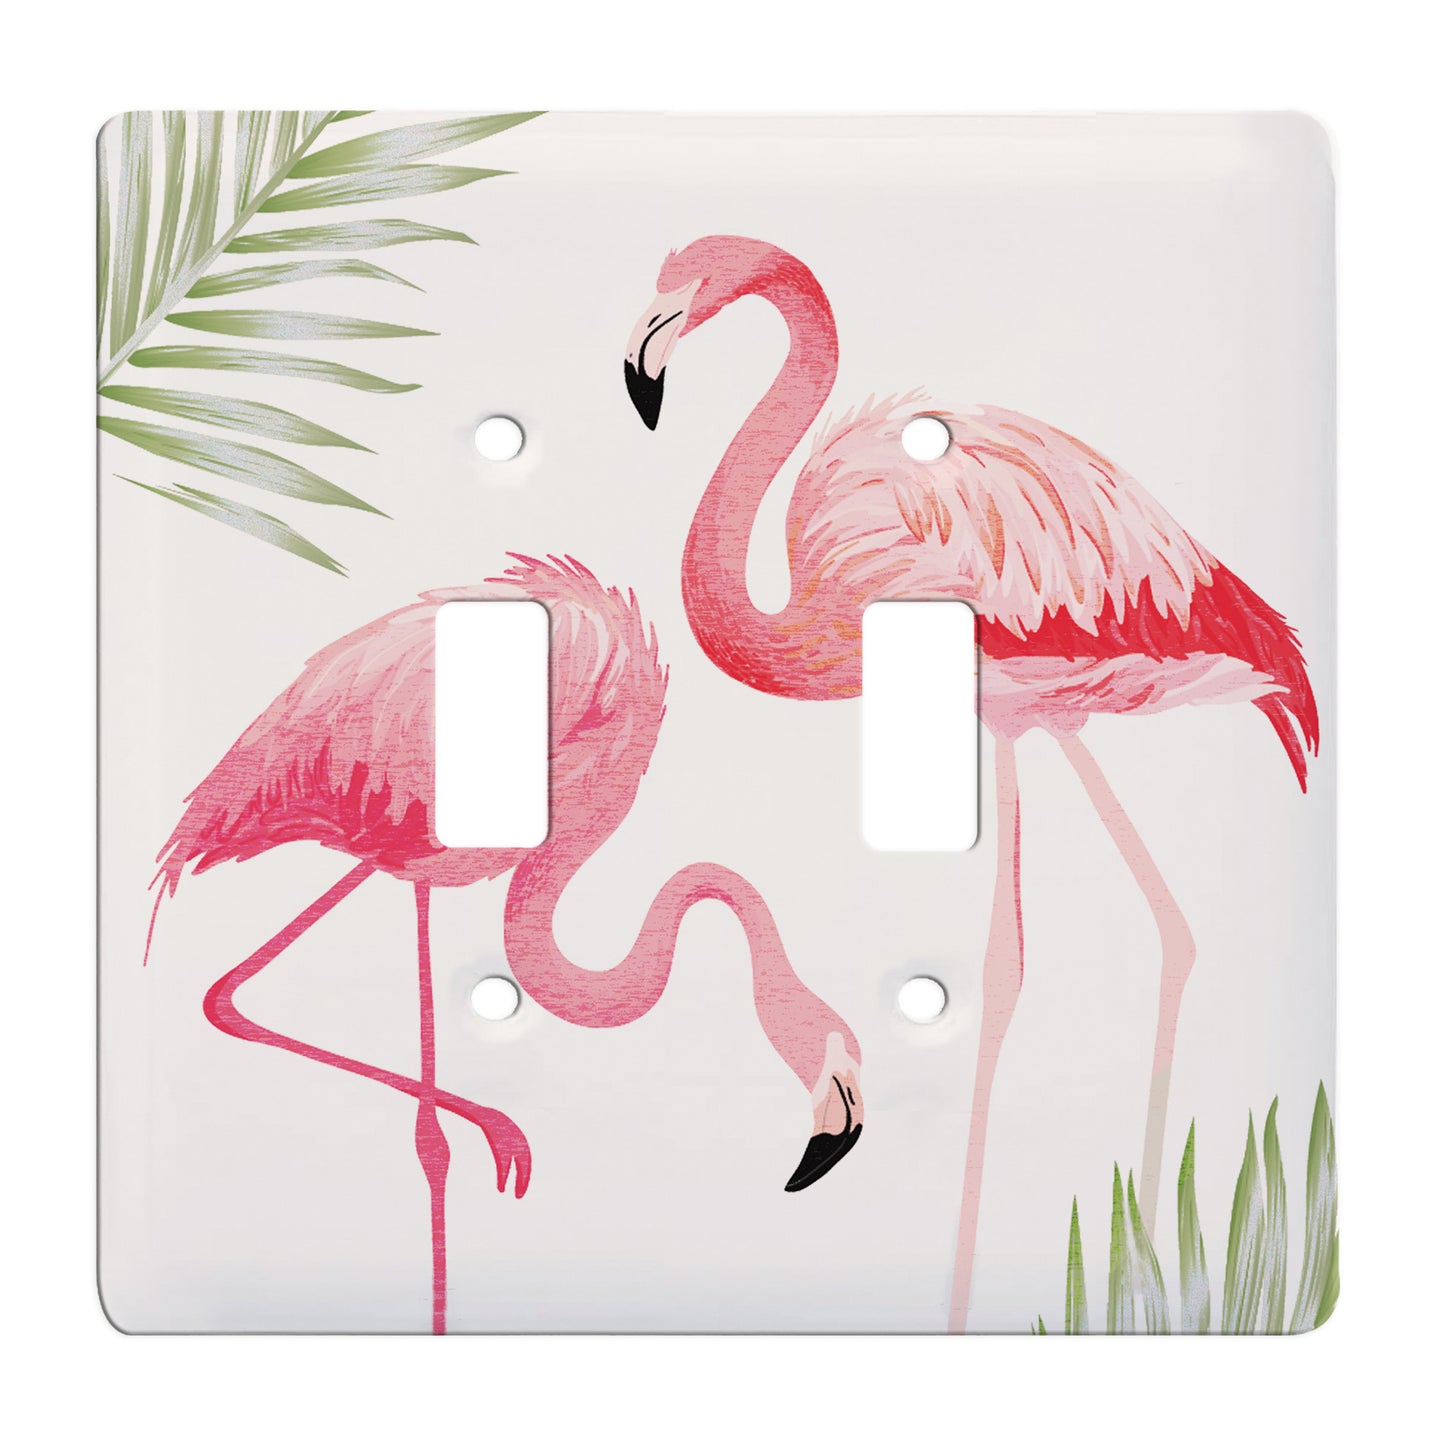 white ceramic double toggle switch plate featuring two pink flamingos and green palm leaves.